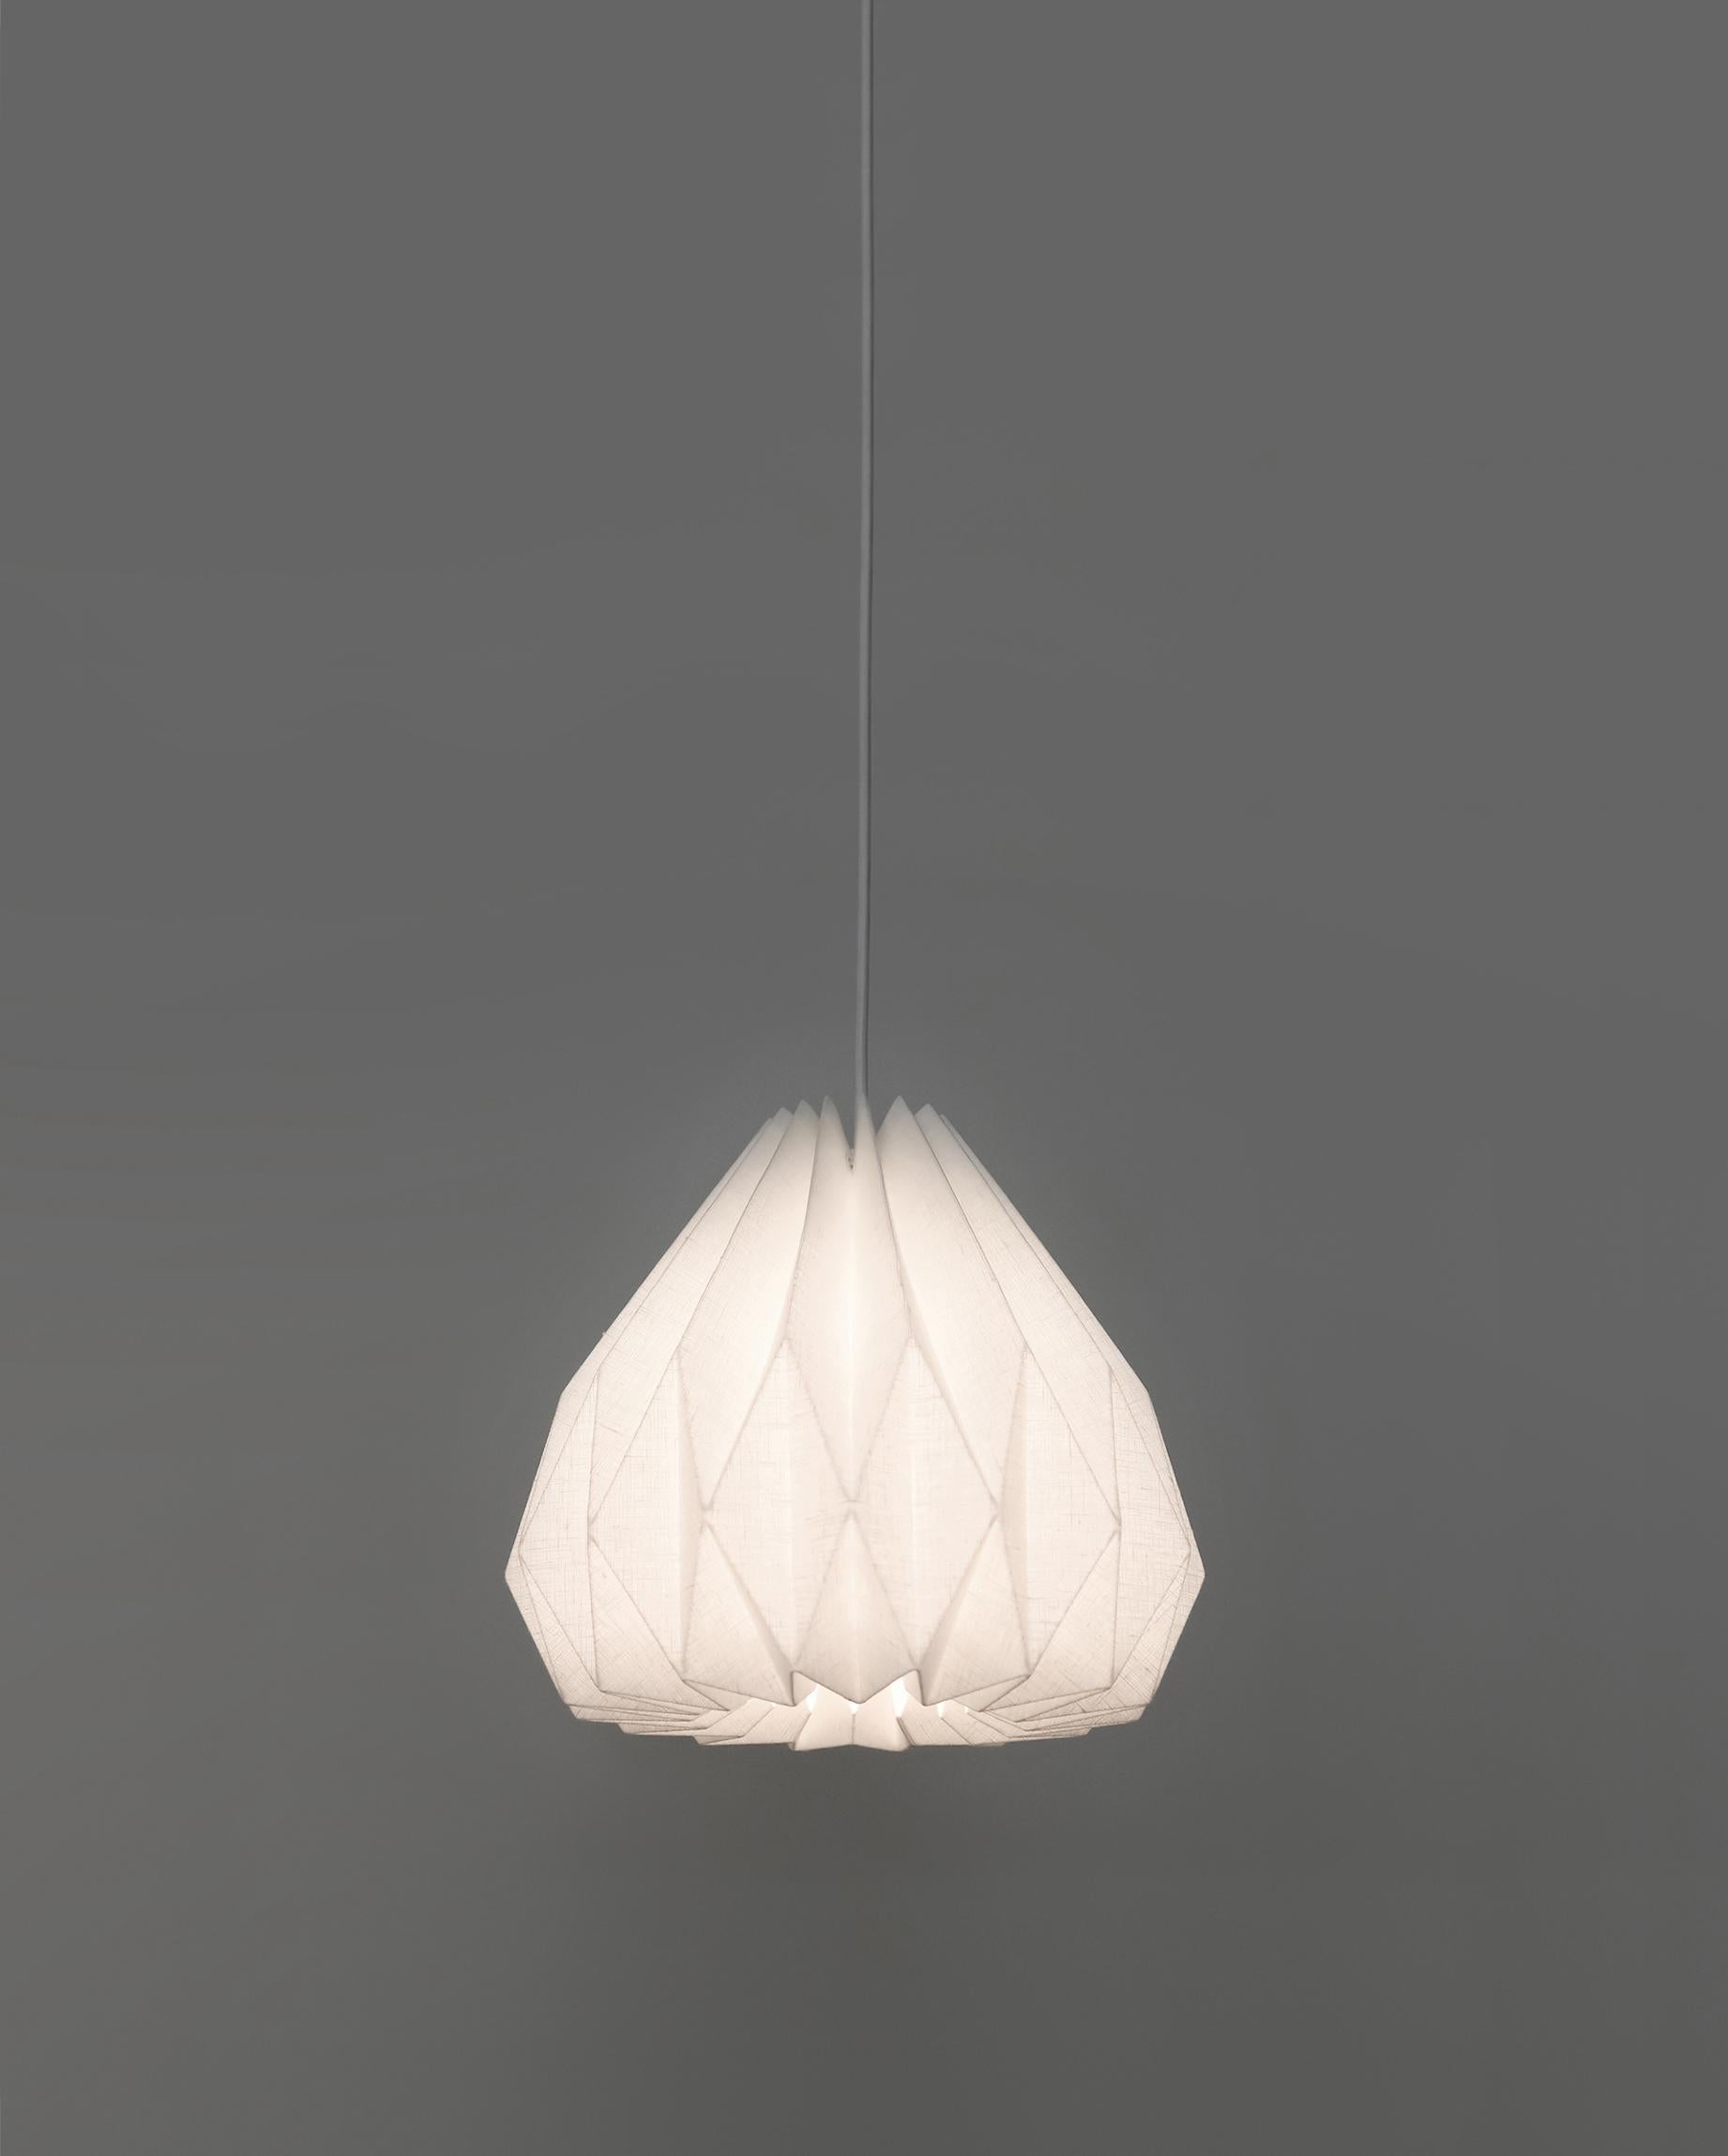 The modern-style pendant lamp will bring an interesting and functional work of art to your interior. The origami-inspired lampshade is made of laminated linen fabric providing bright, yet soft ambient light and showing the beautiful texture of the